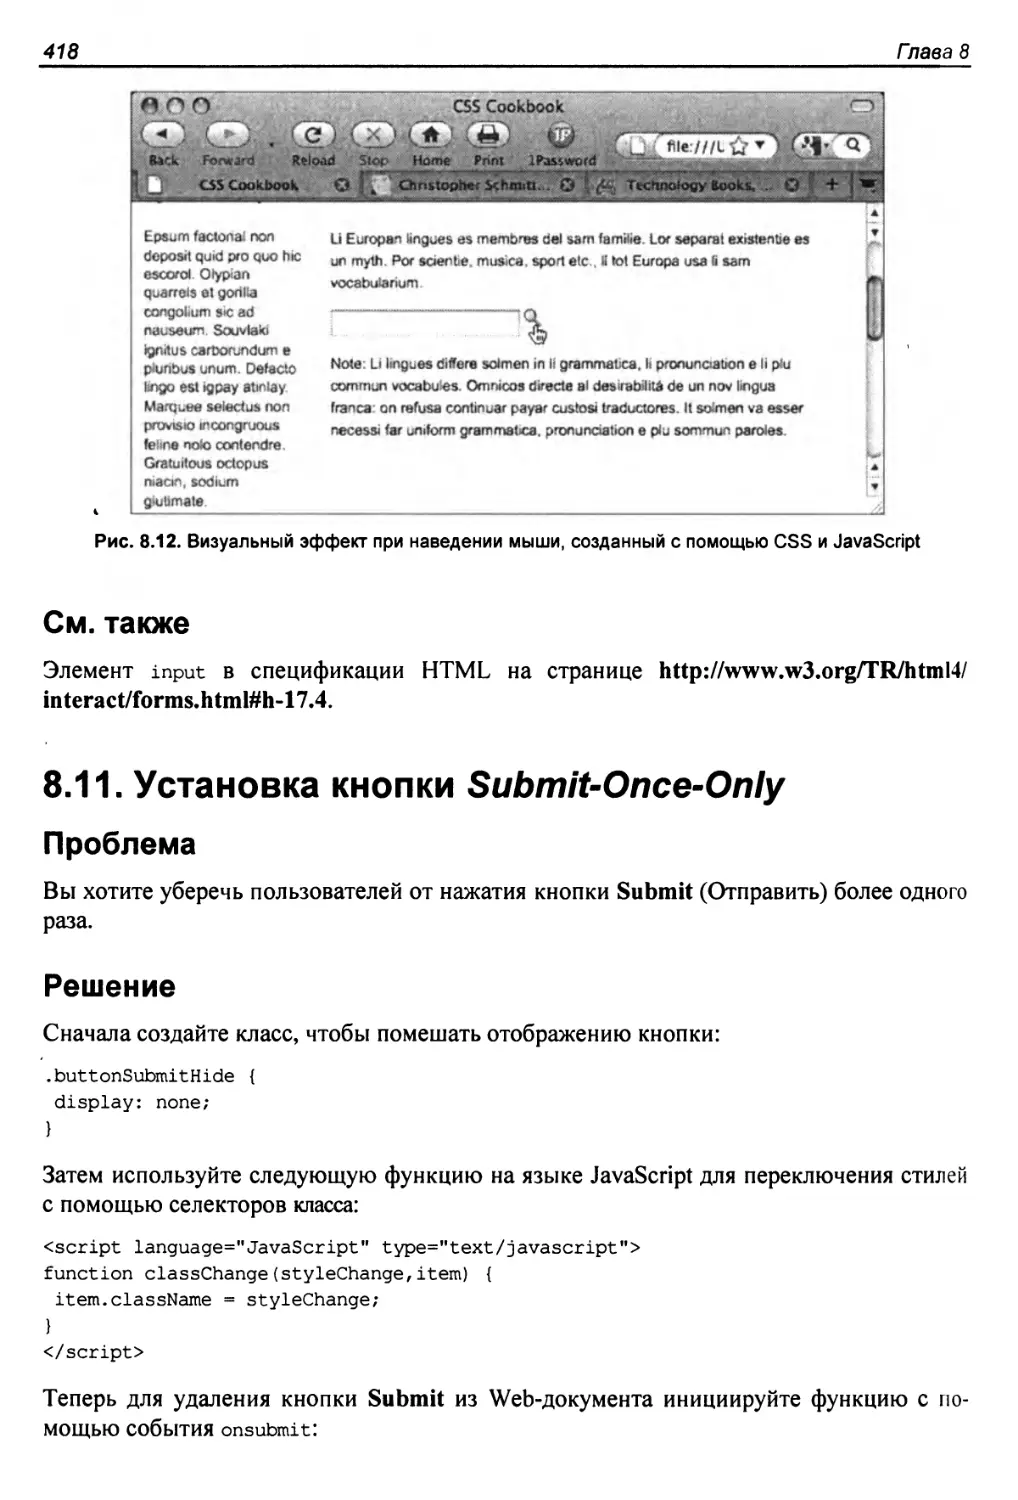 8.11. Установка кнопки Submit-Once-Only